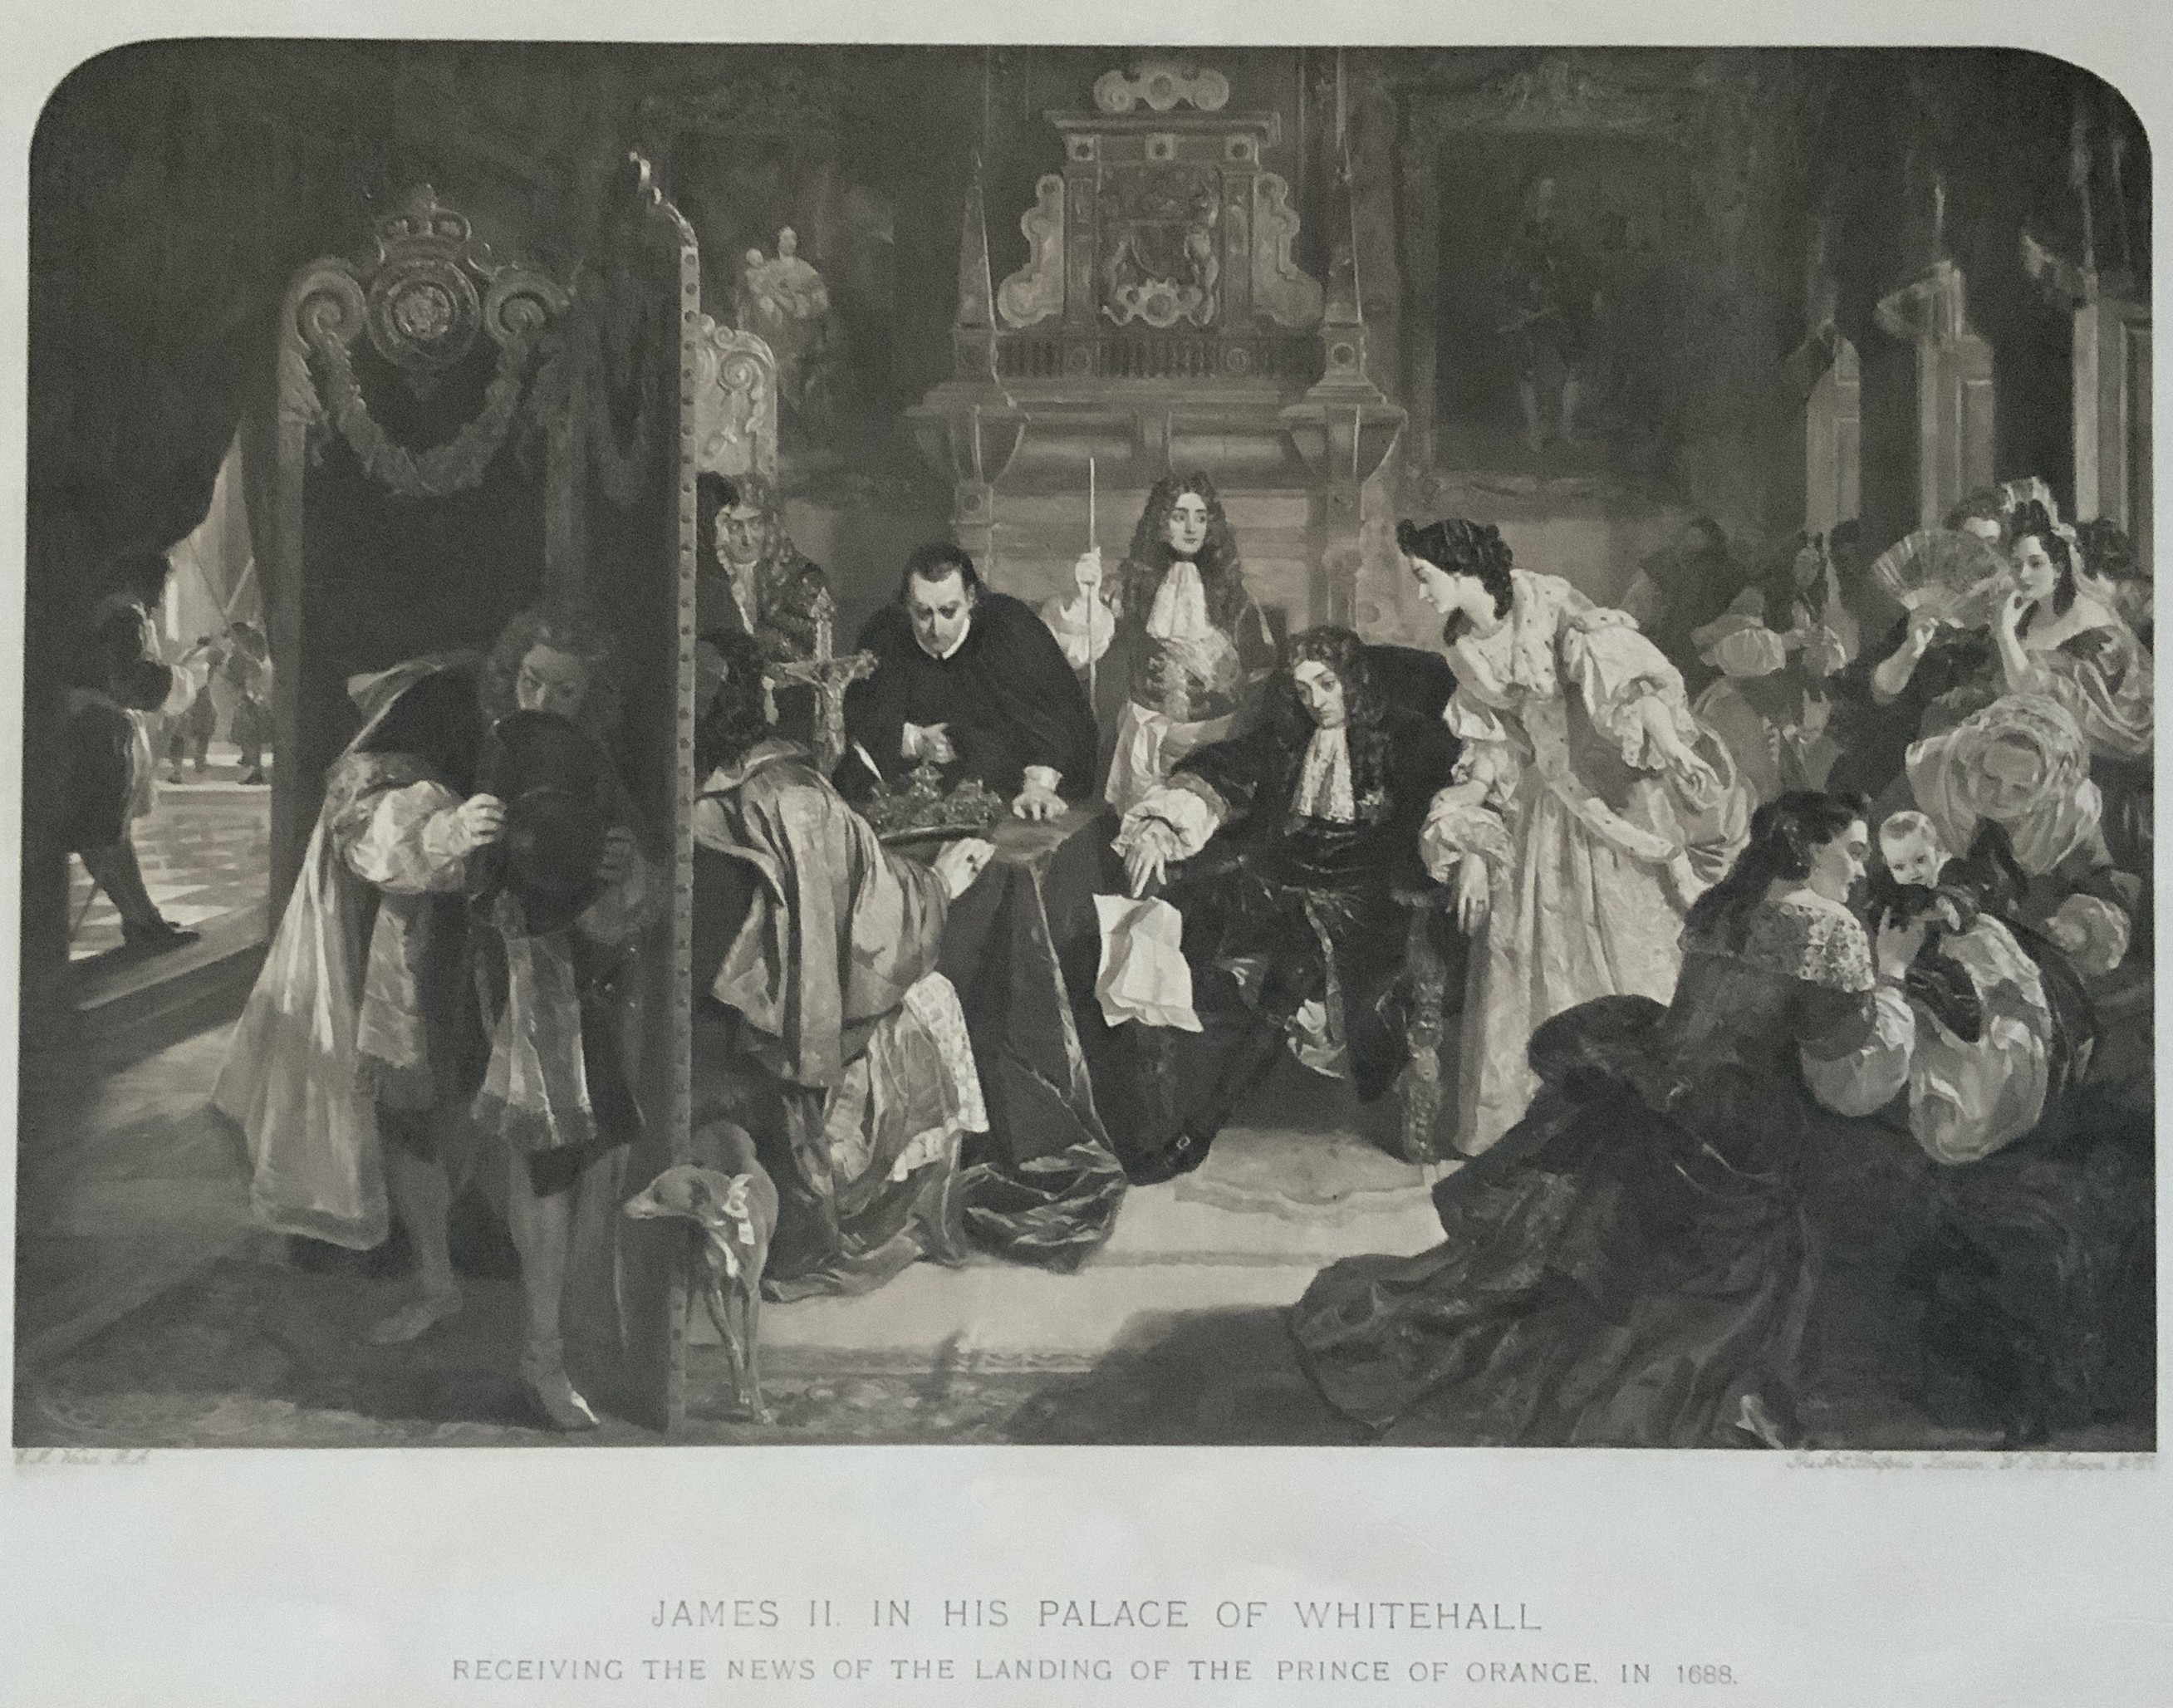 JAMES II IN HIS PALACE OF WHITEHALL ENGRAVING - Image 3 of 3